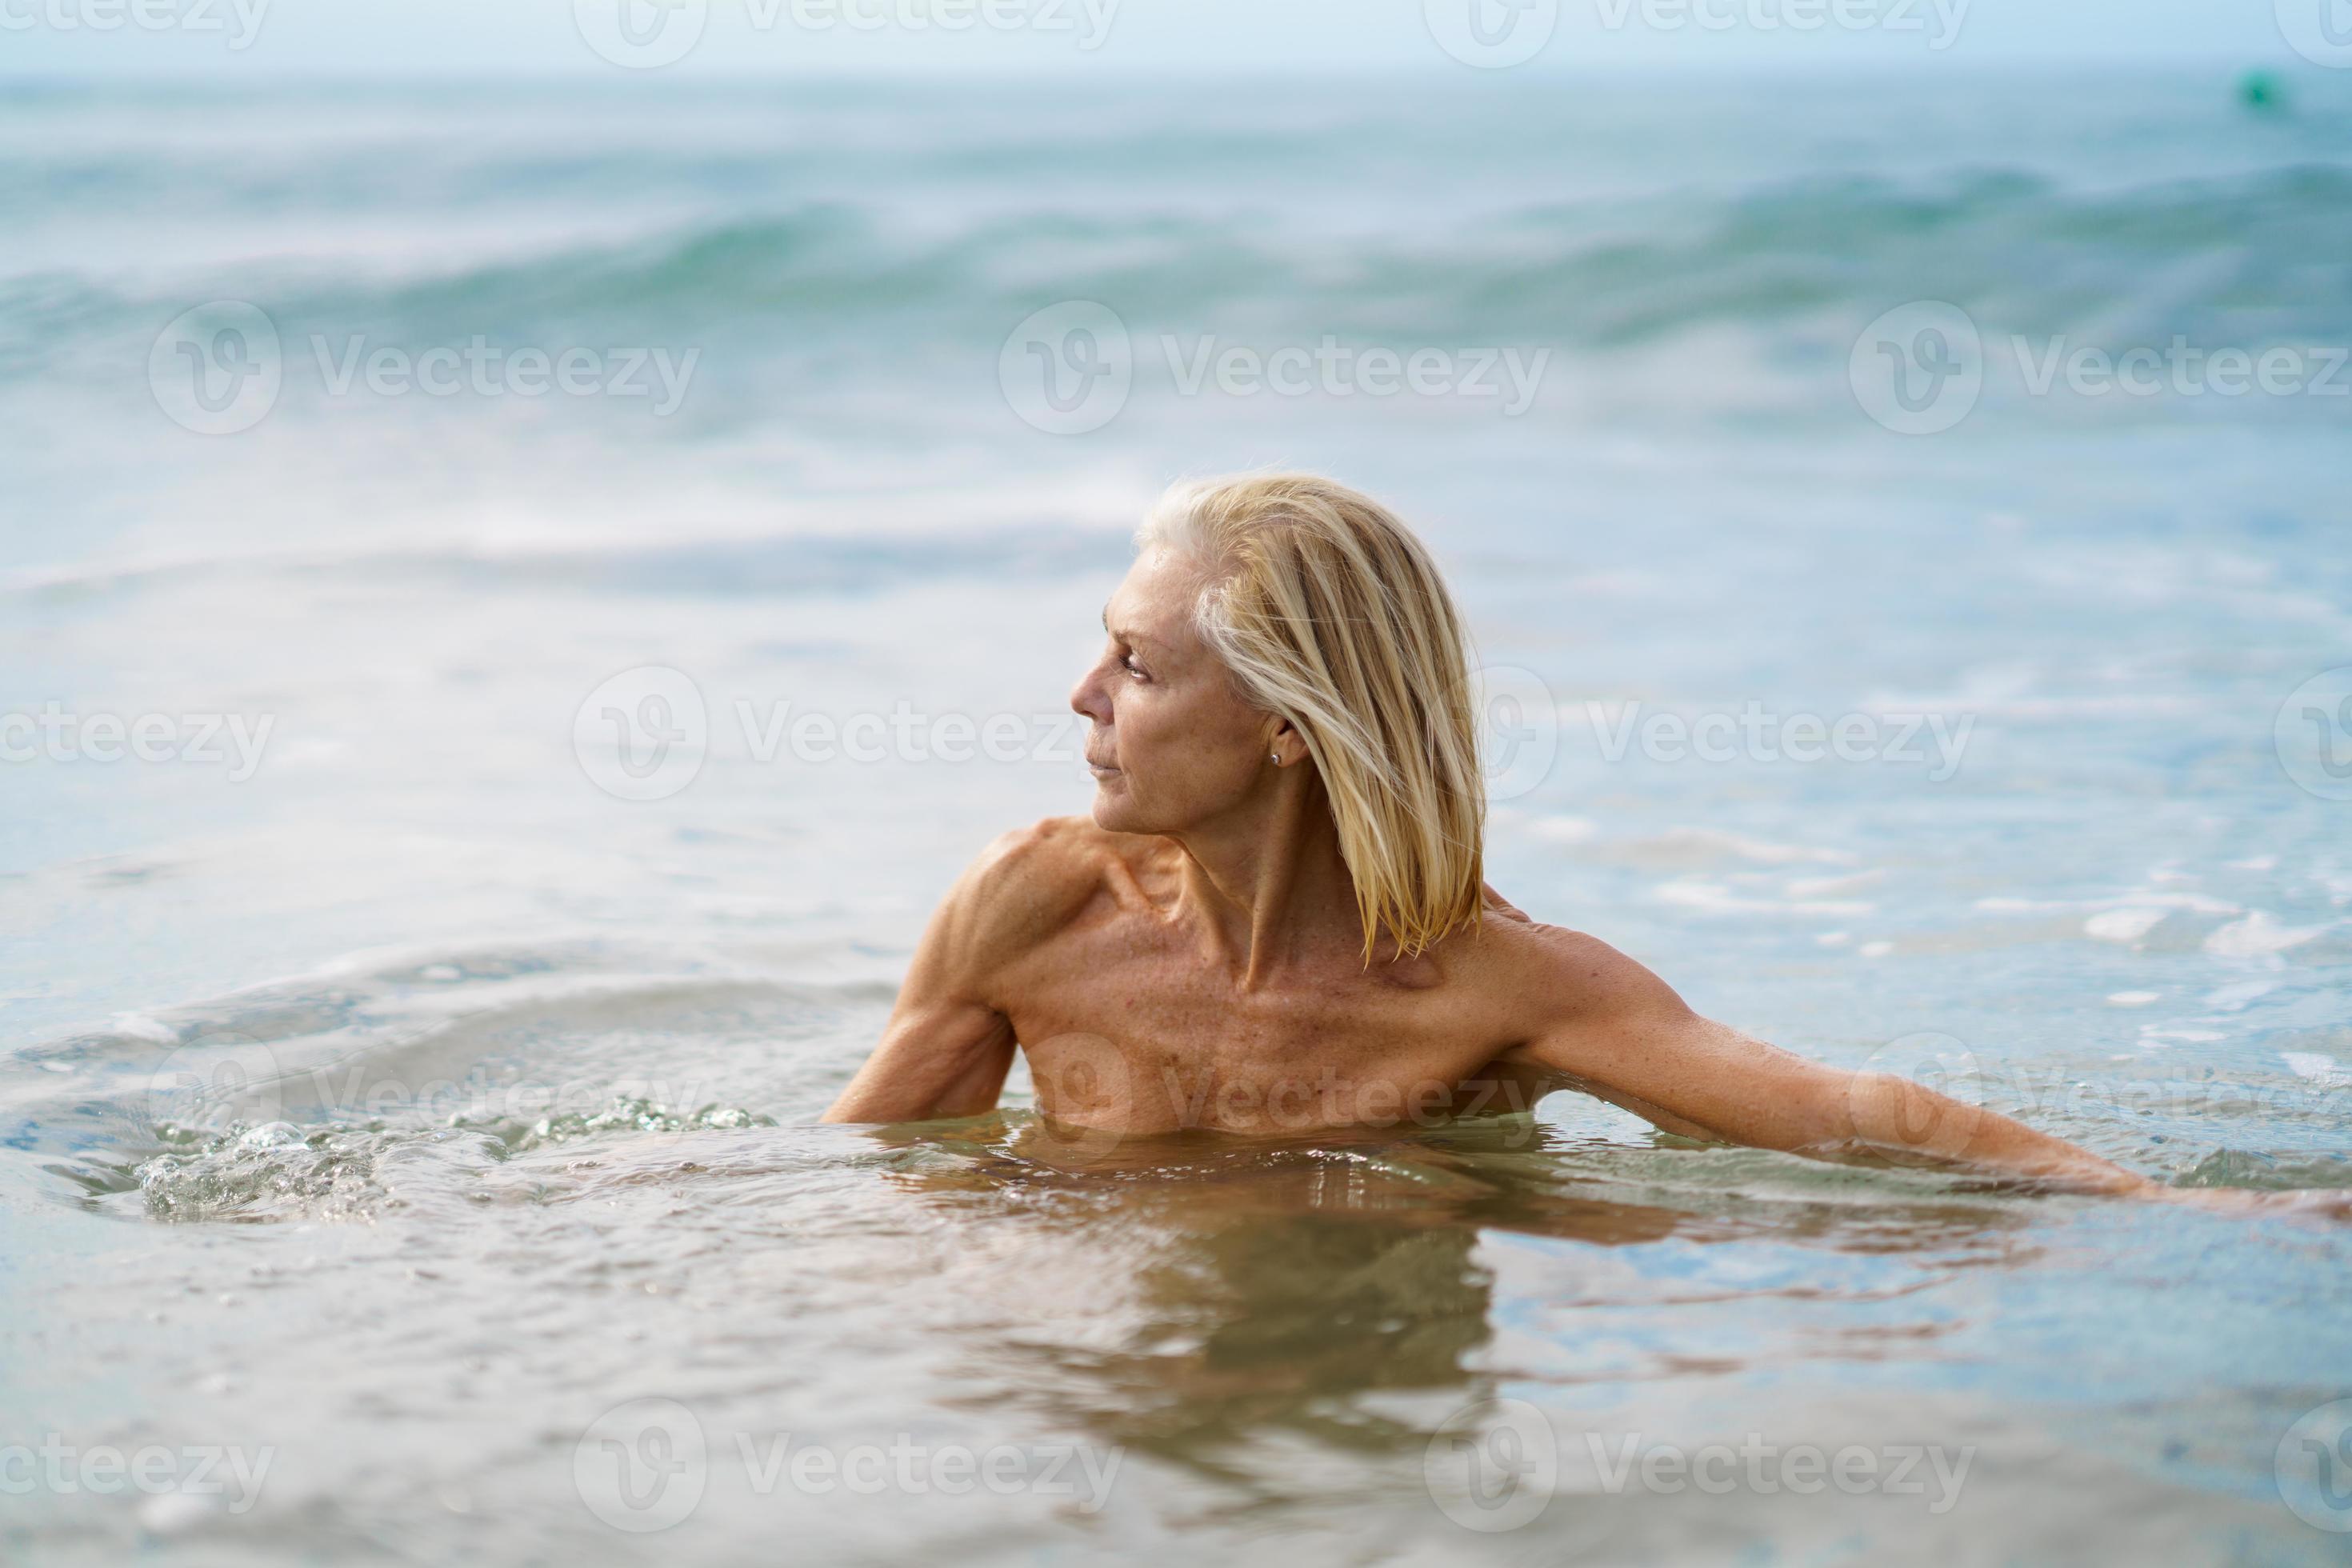 brian corder recommends Mature Nudists Photos